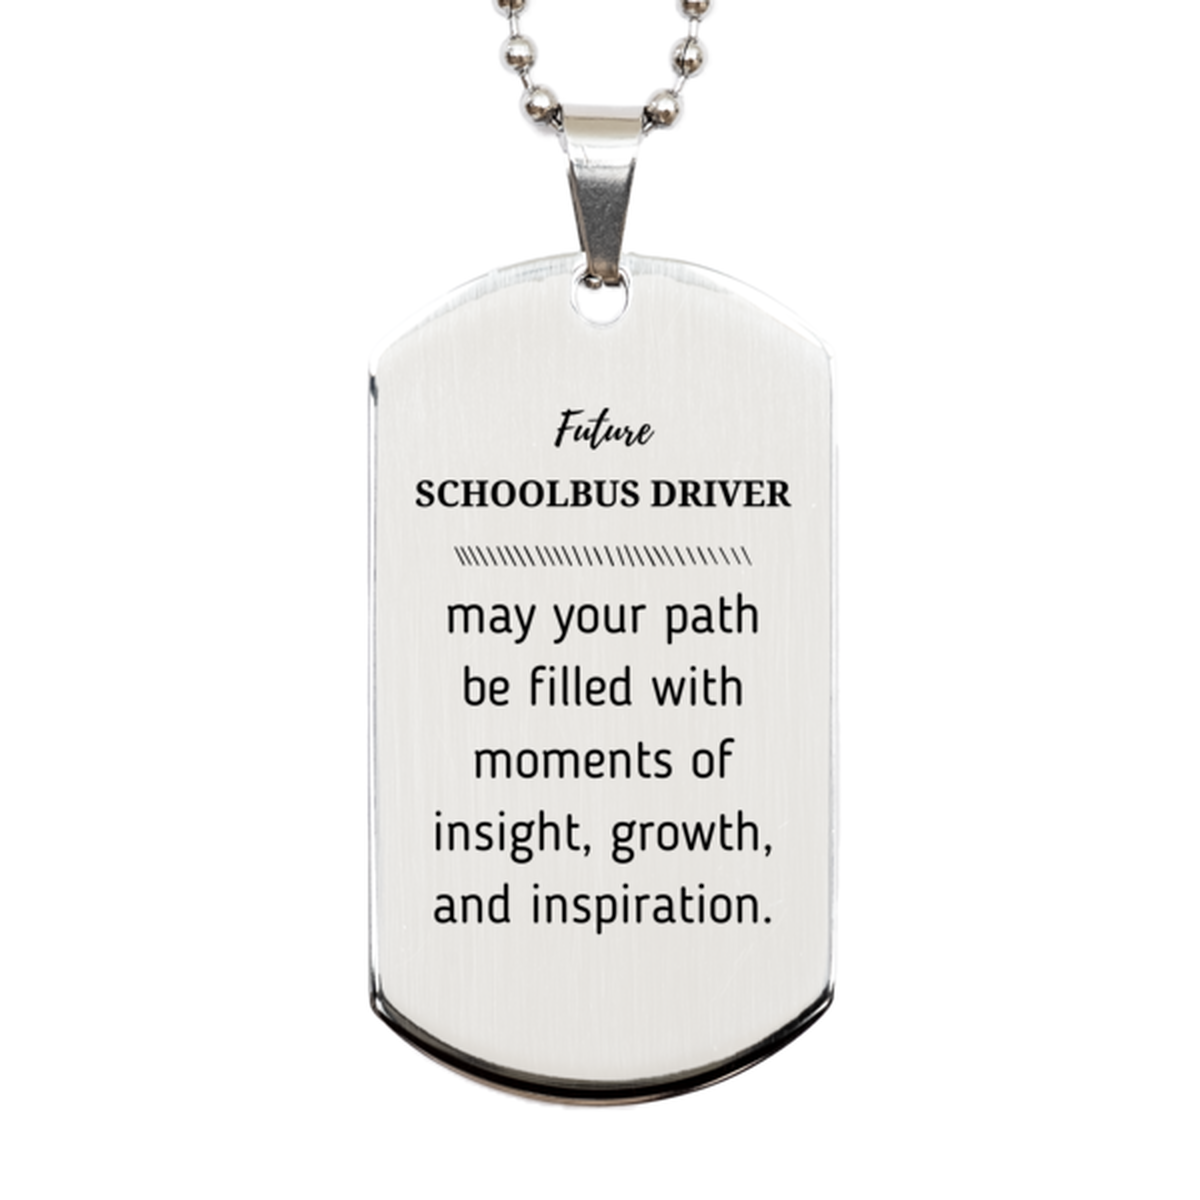 Future Schoolbus Driver Gifts, May your path be filled with moments of insight, Graduation Gifts for New Schoolbus Driver, Christmas Unique Silver Dog Tag For Men, Women, Friends